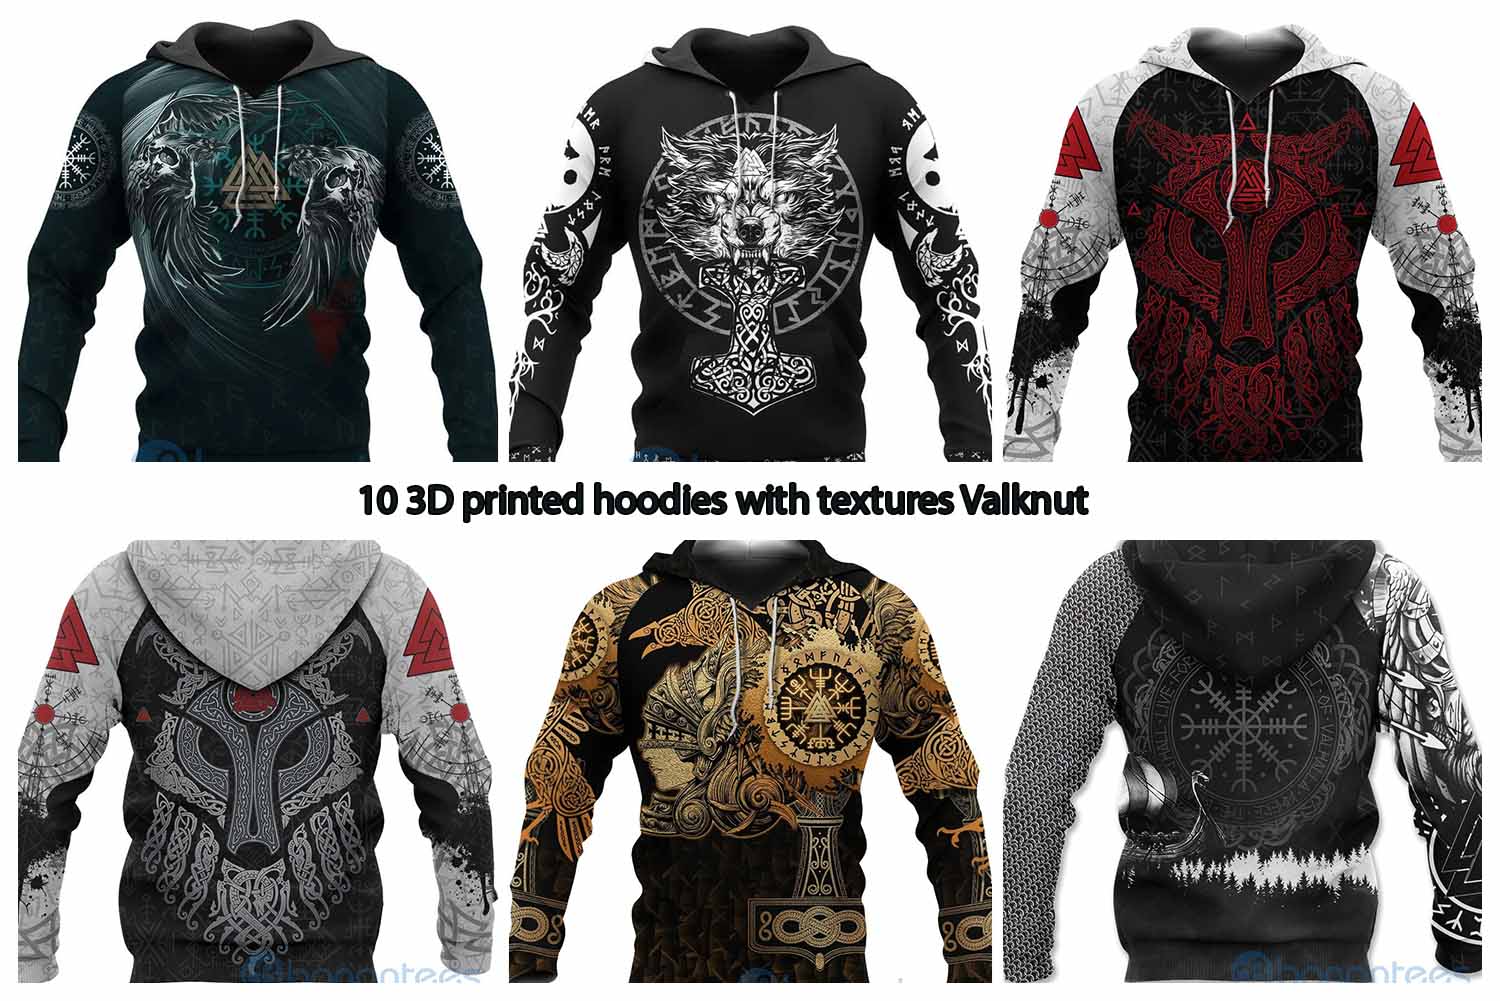 10 3D printed hoodies with textures Valknut